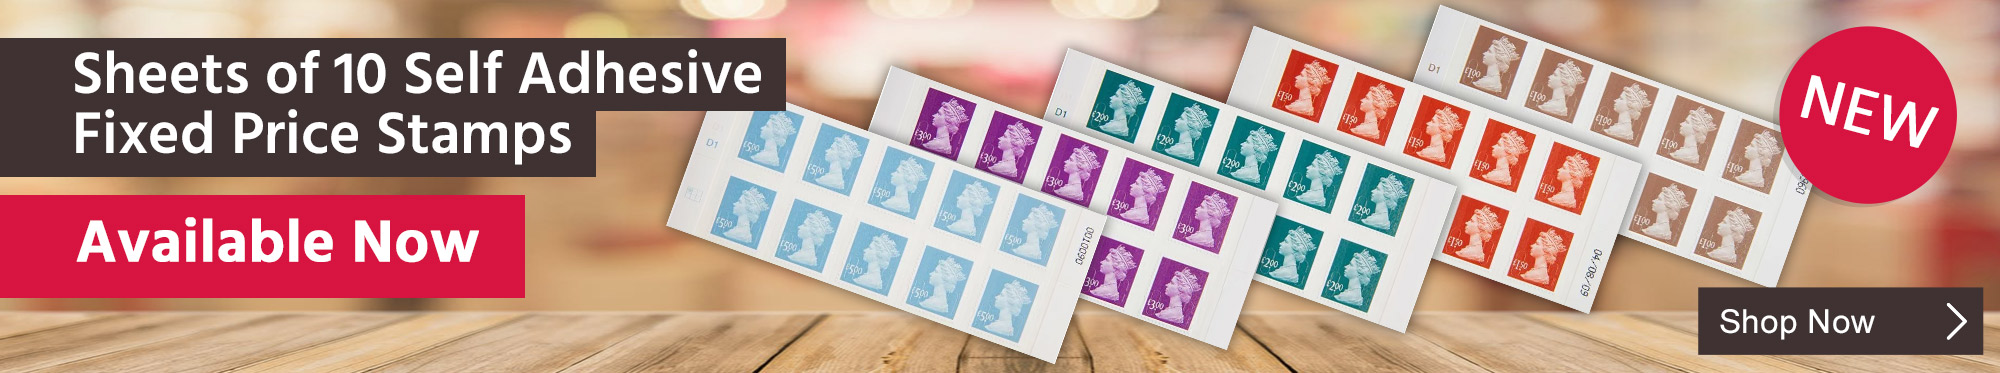 Sheets of 10 Fixed Price Stamps Available Now